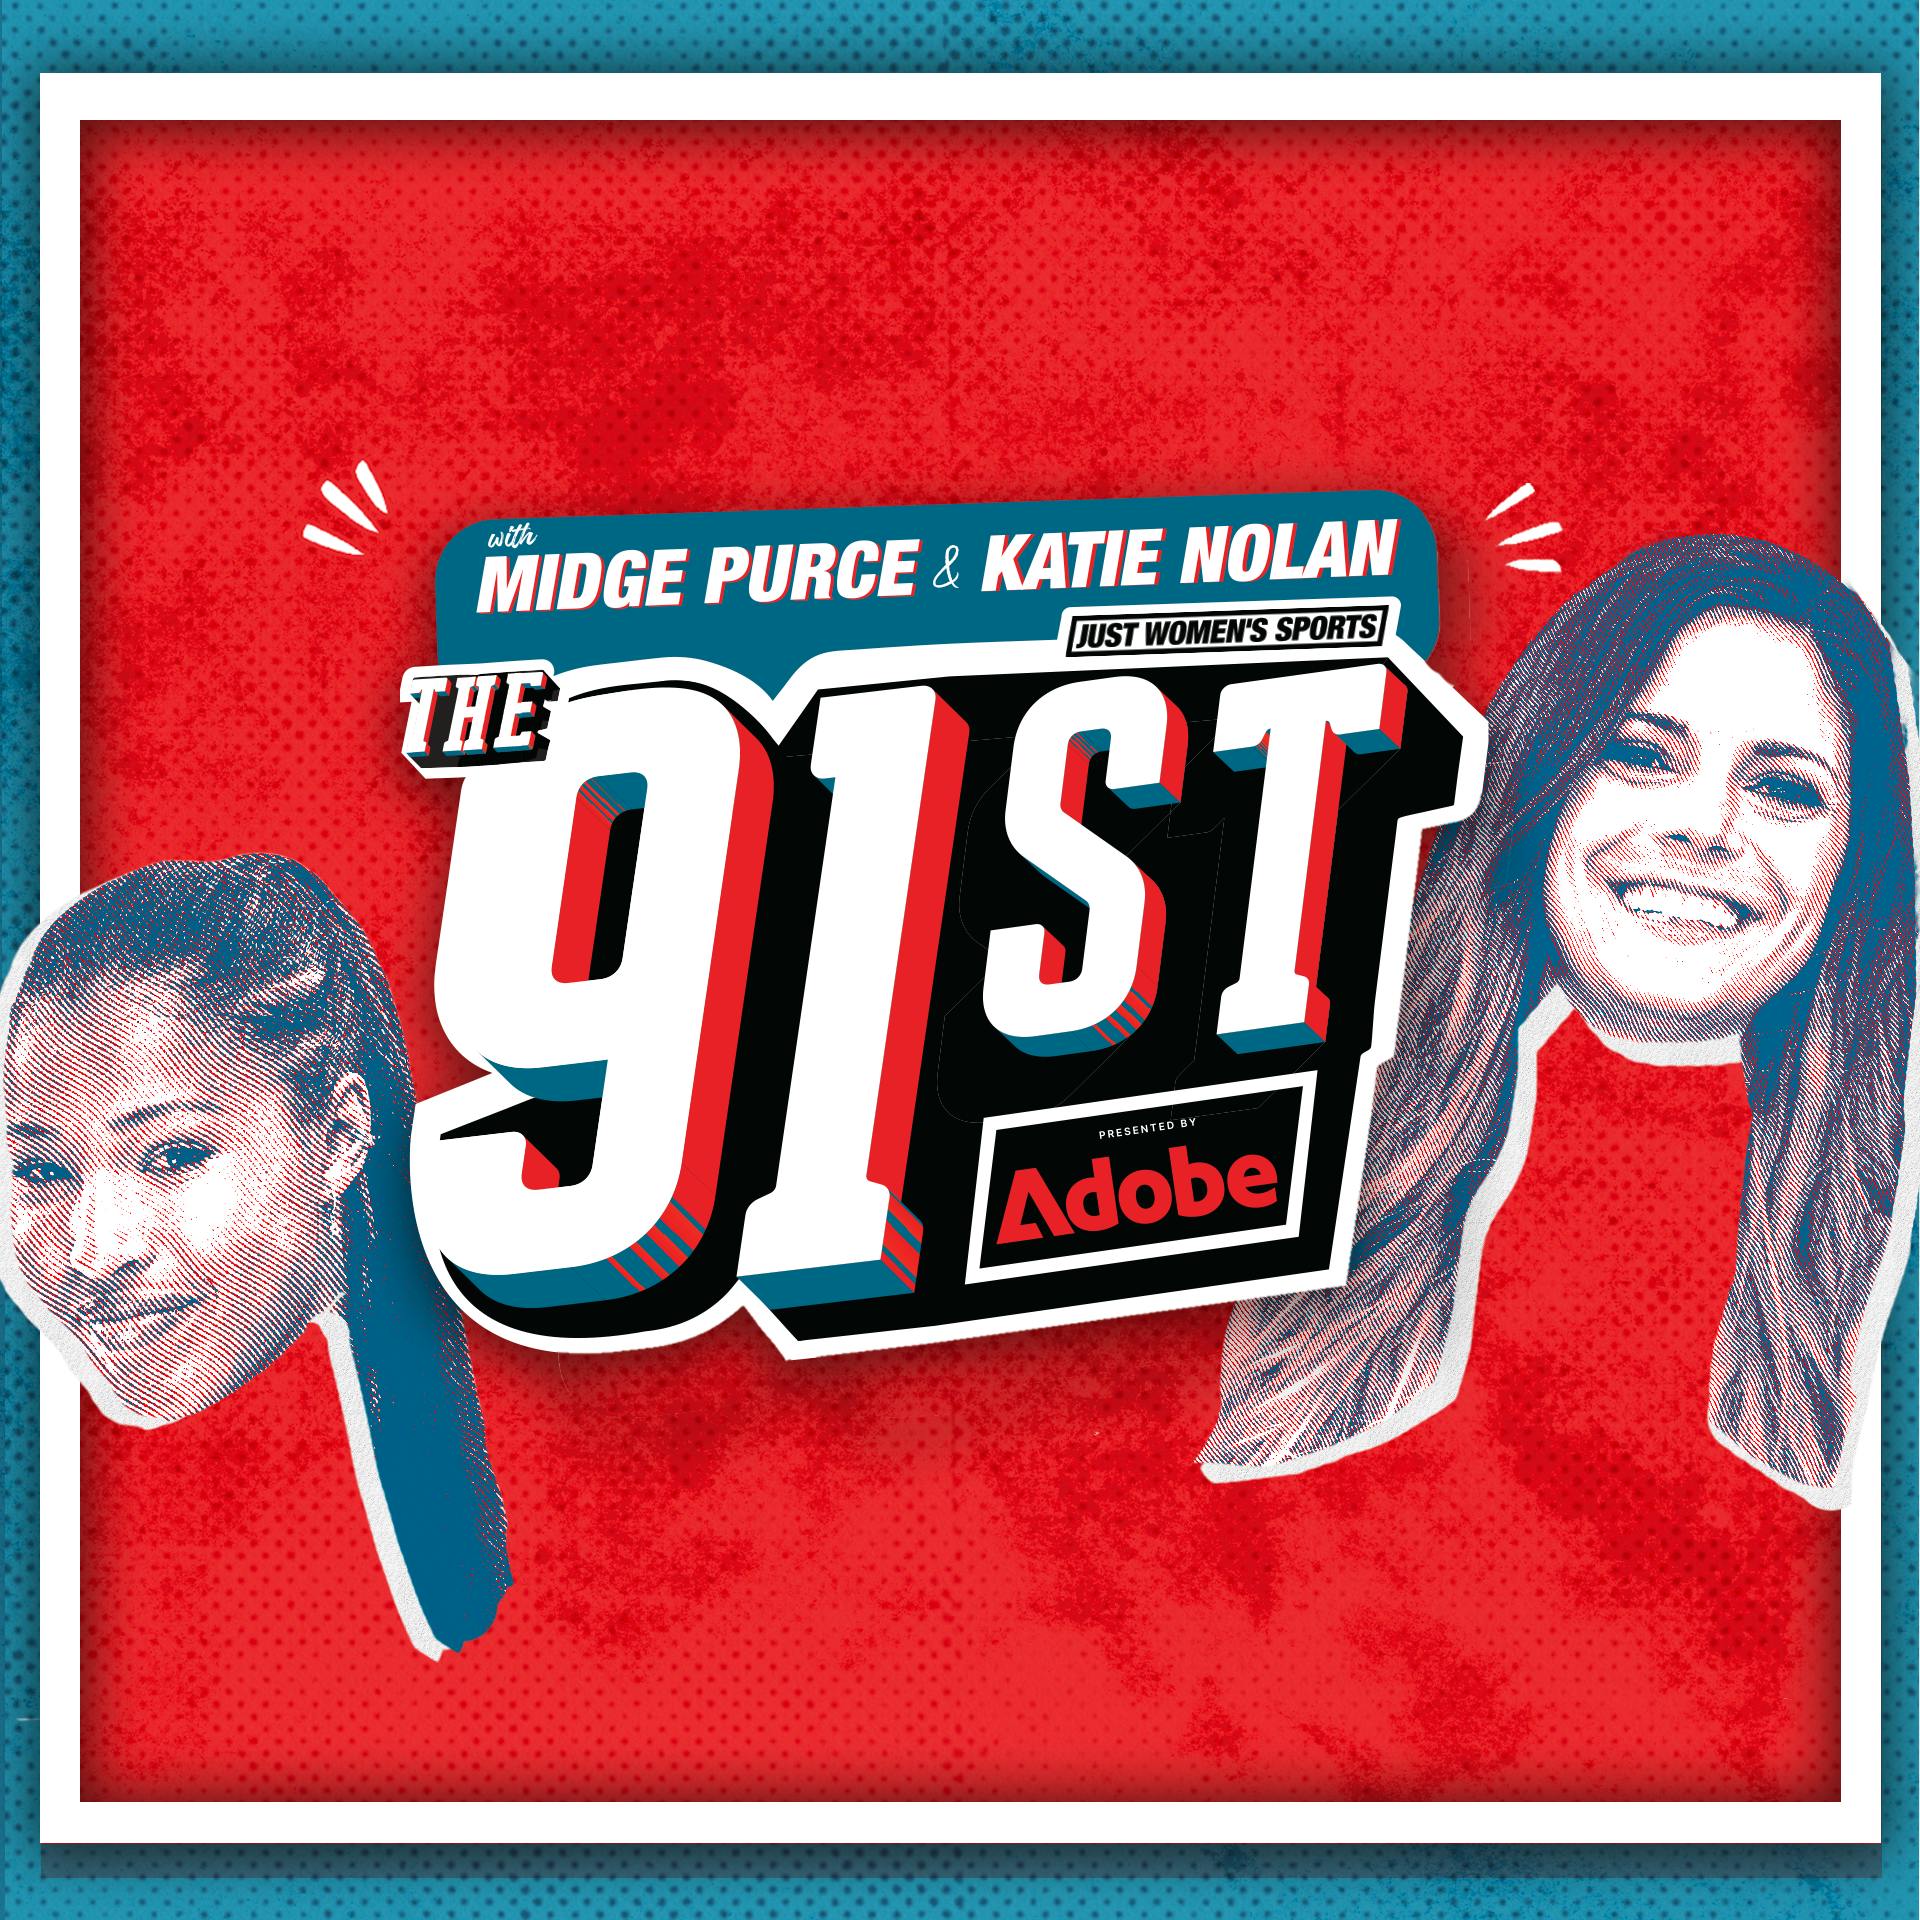 Every New Beginning Comes from Some Other Beginning's End | The 91st with Midge Purce and Katie Nolan presented by Adobe